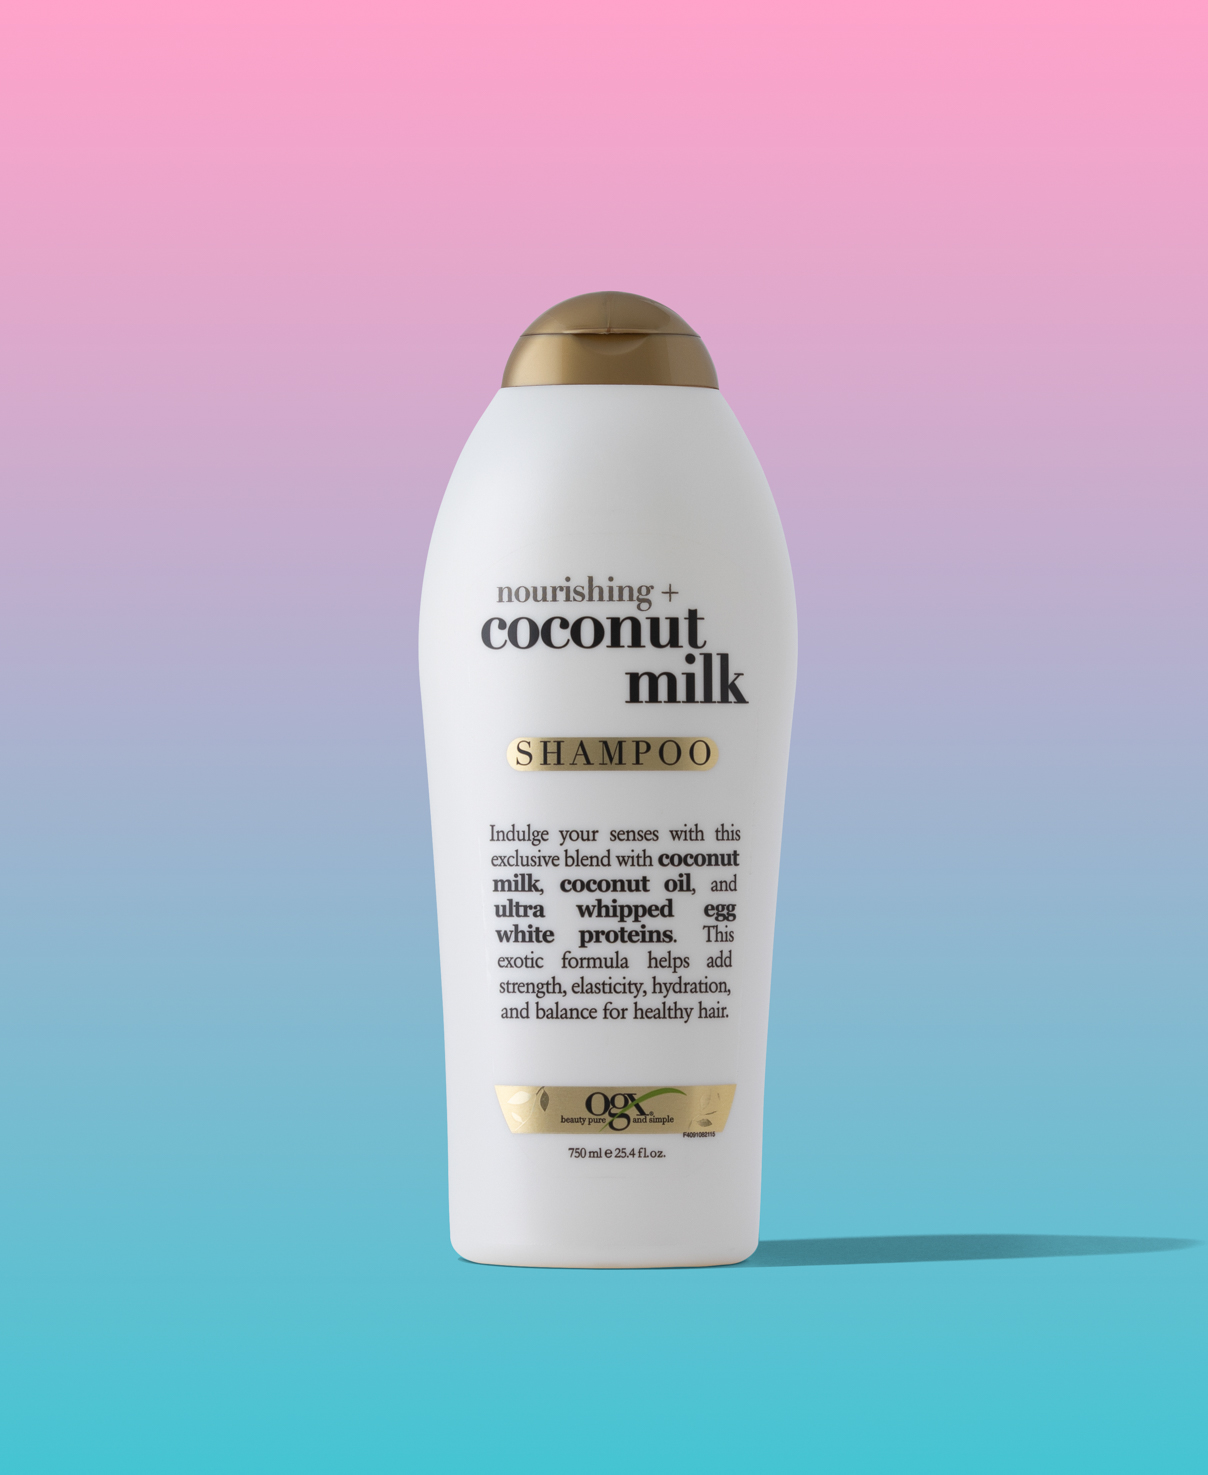 OGX Nourishing + Coconut Milk Moisturizing Shampoo for Strong & Healthy Hair, with Coconut Milk, Coconut Oil & Egg White Protein, Paraben-Free, Sulfate-Free Surfactants, 25.4 fl oz